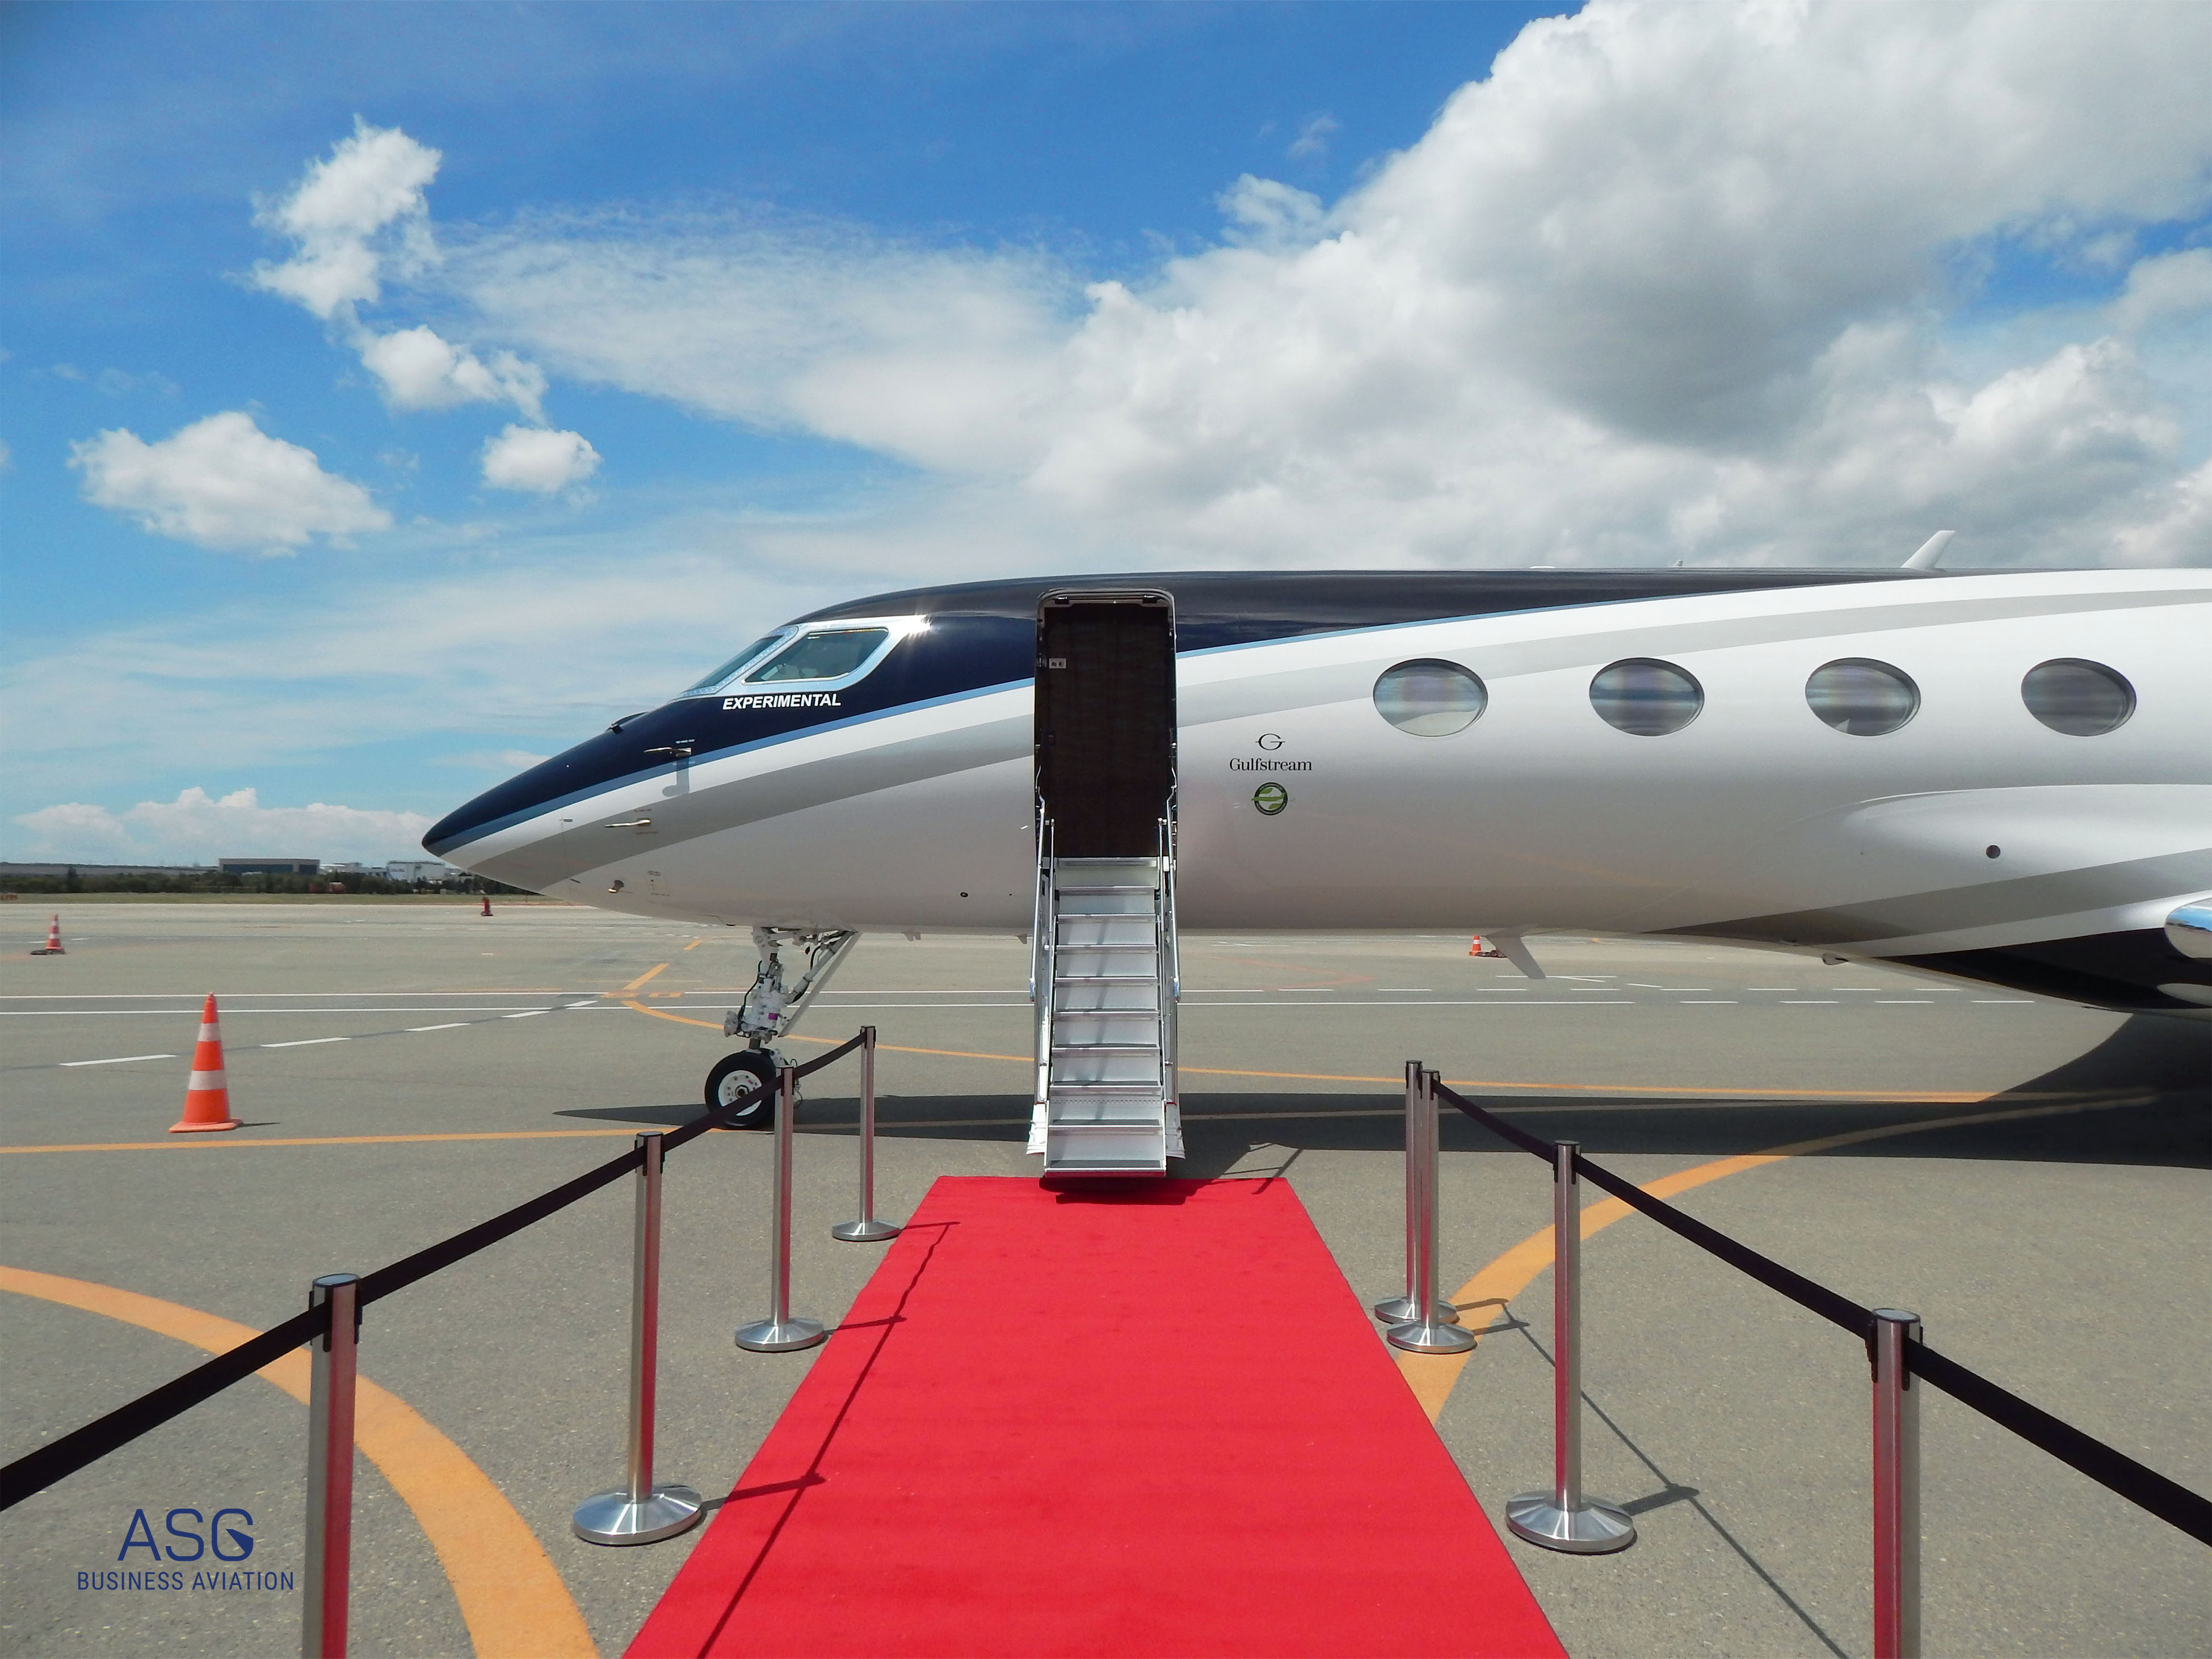 "Gulfstream G700" was displayed at the "ASG Business Aviation" terminal as part of the world tour